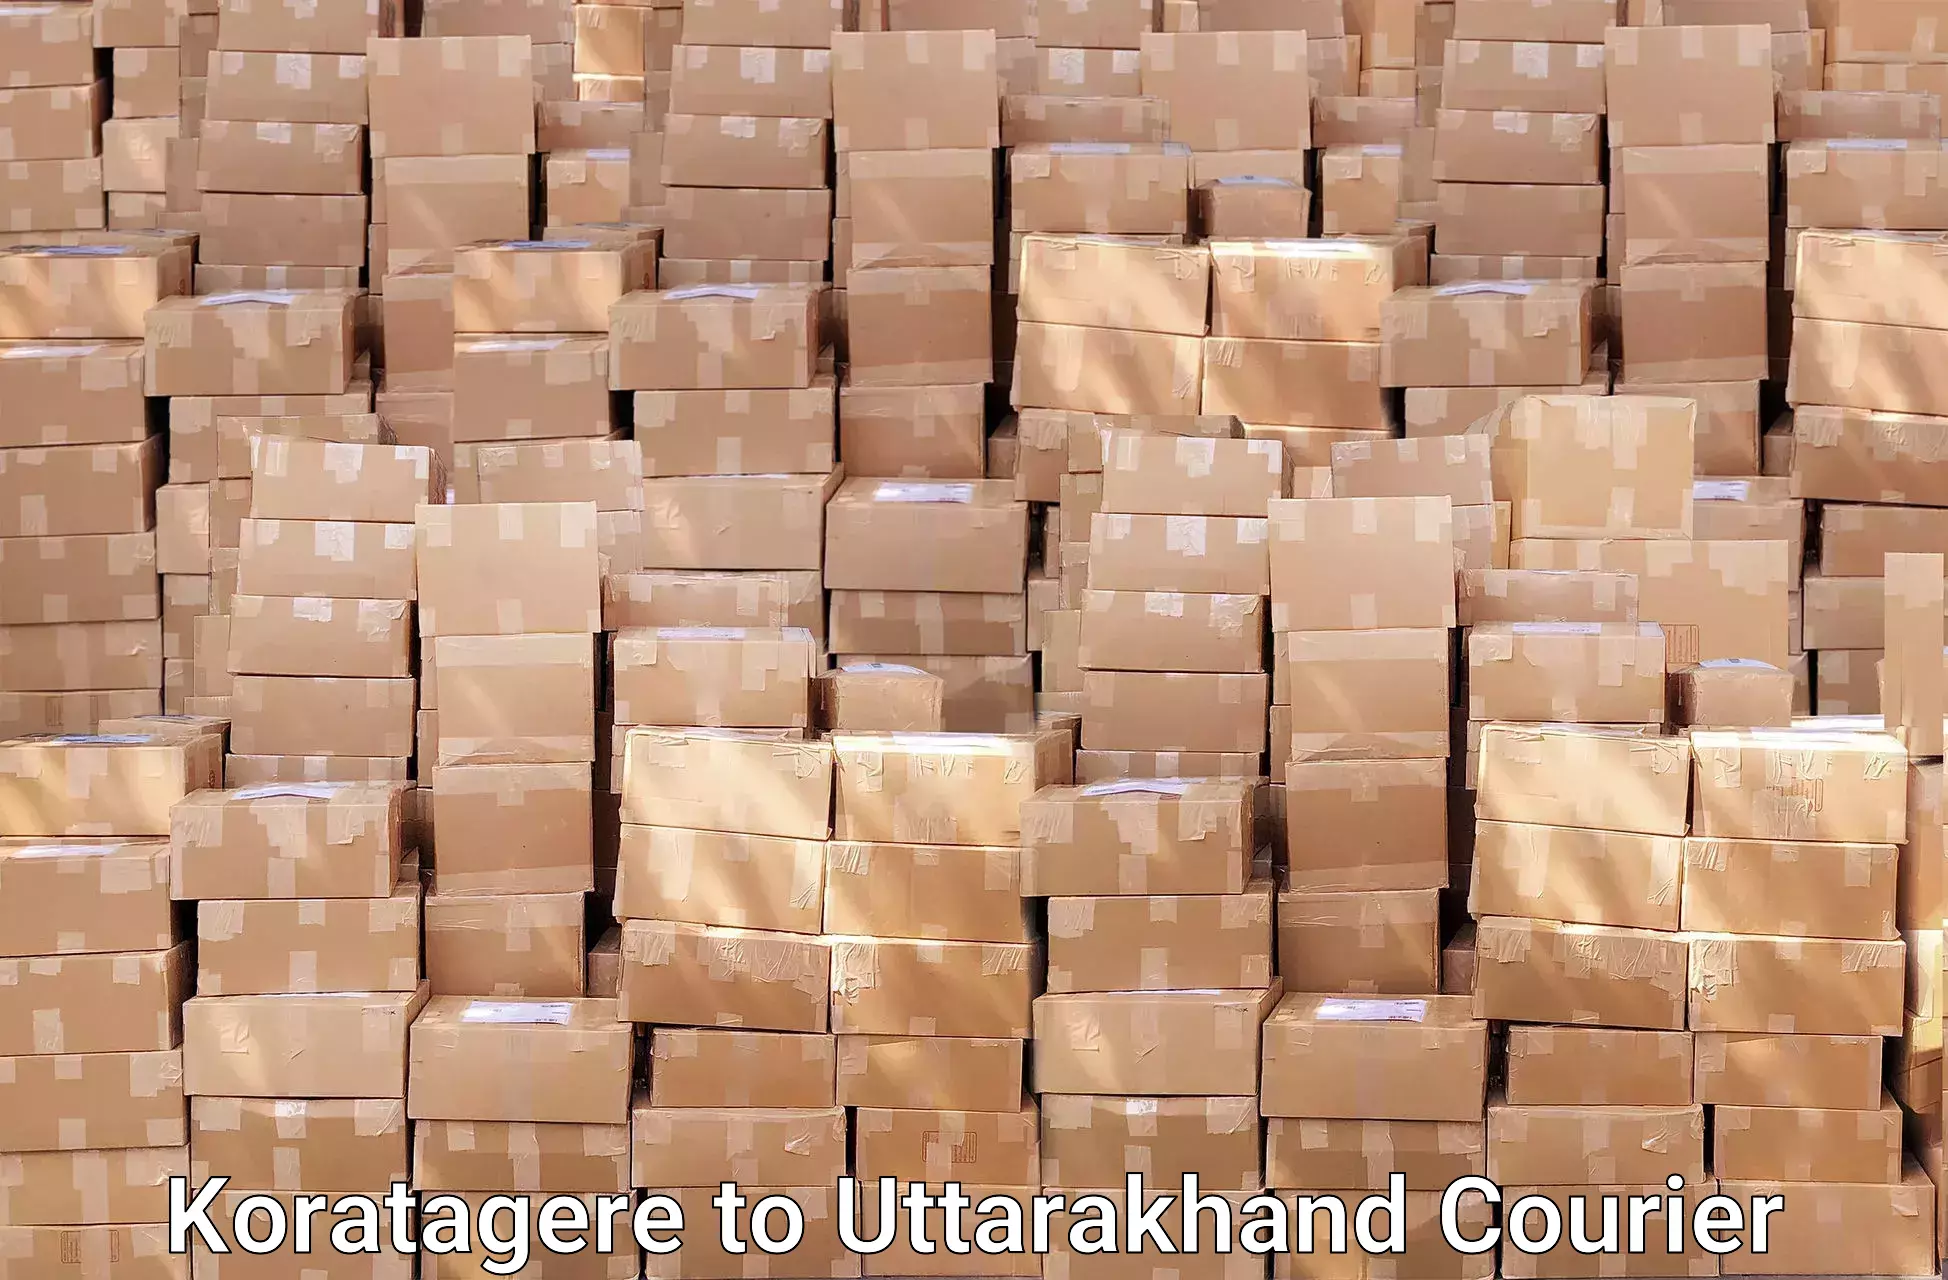 Professional moving assistance in Koratagere to Rishikesh